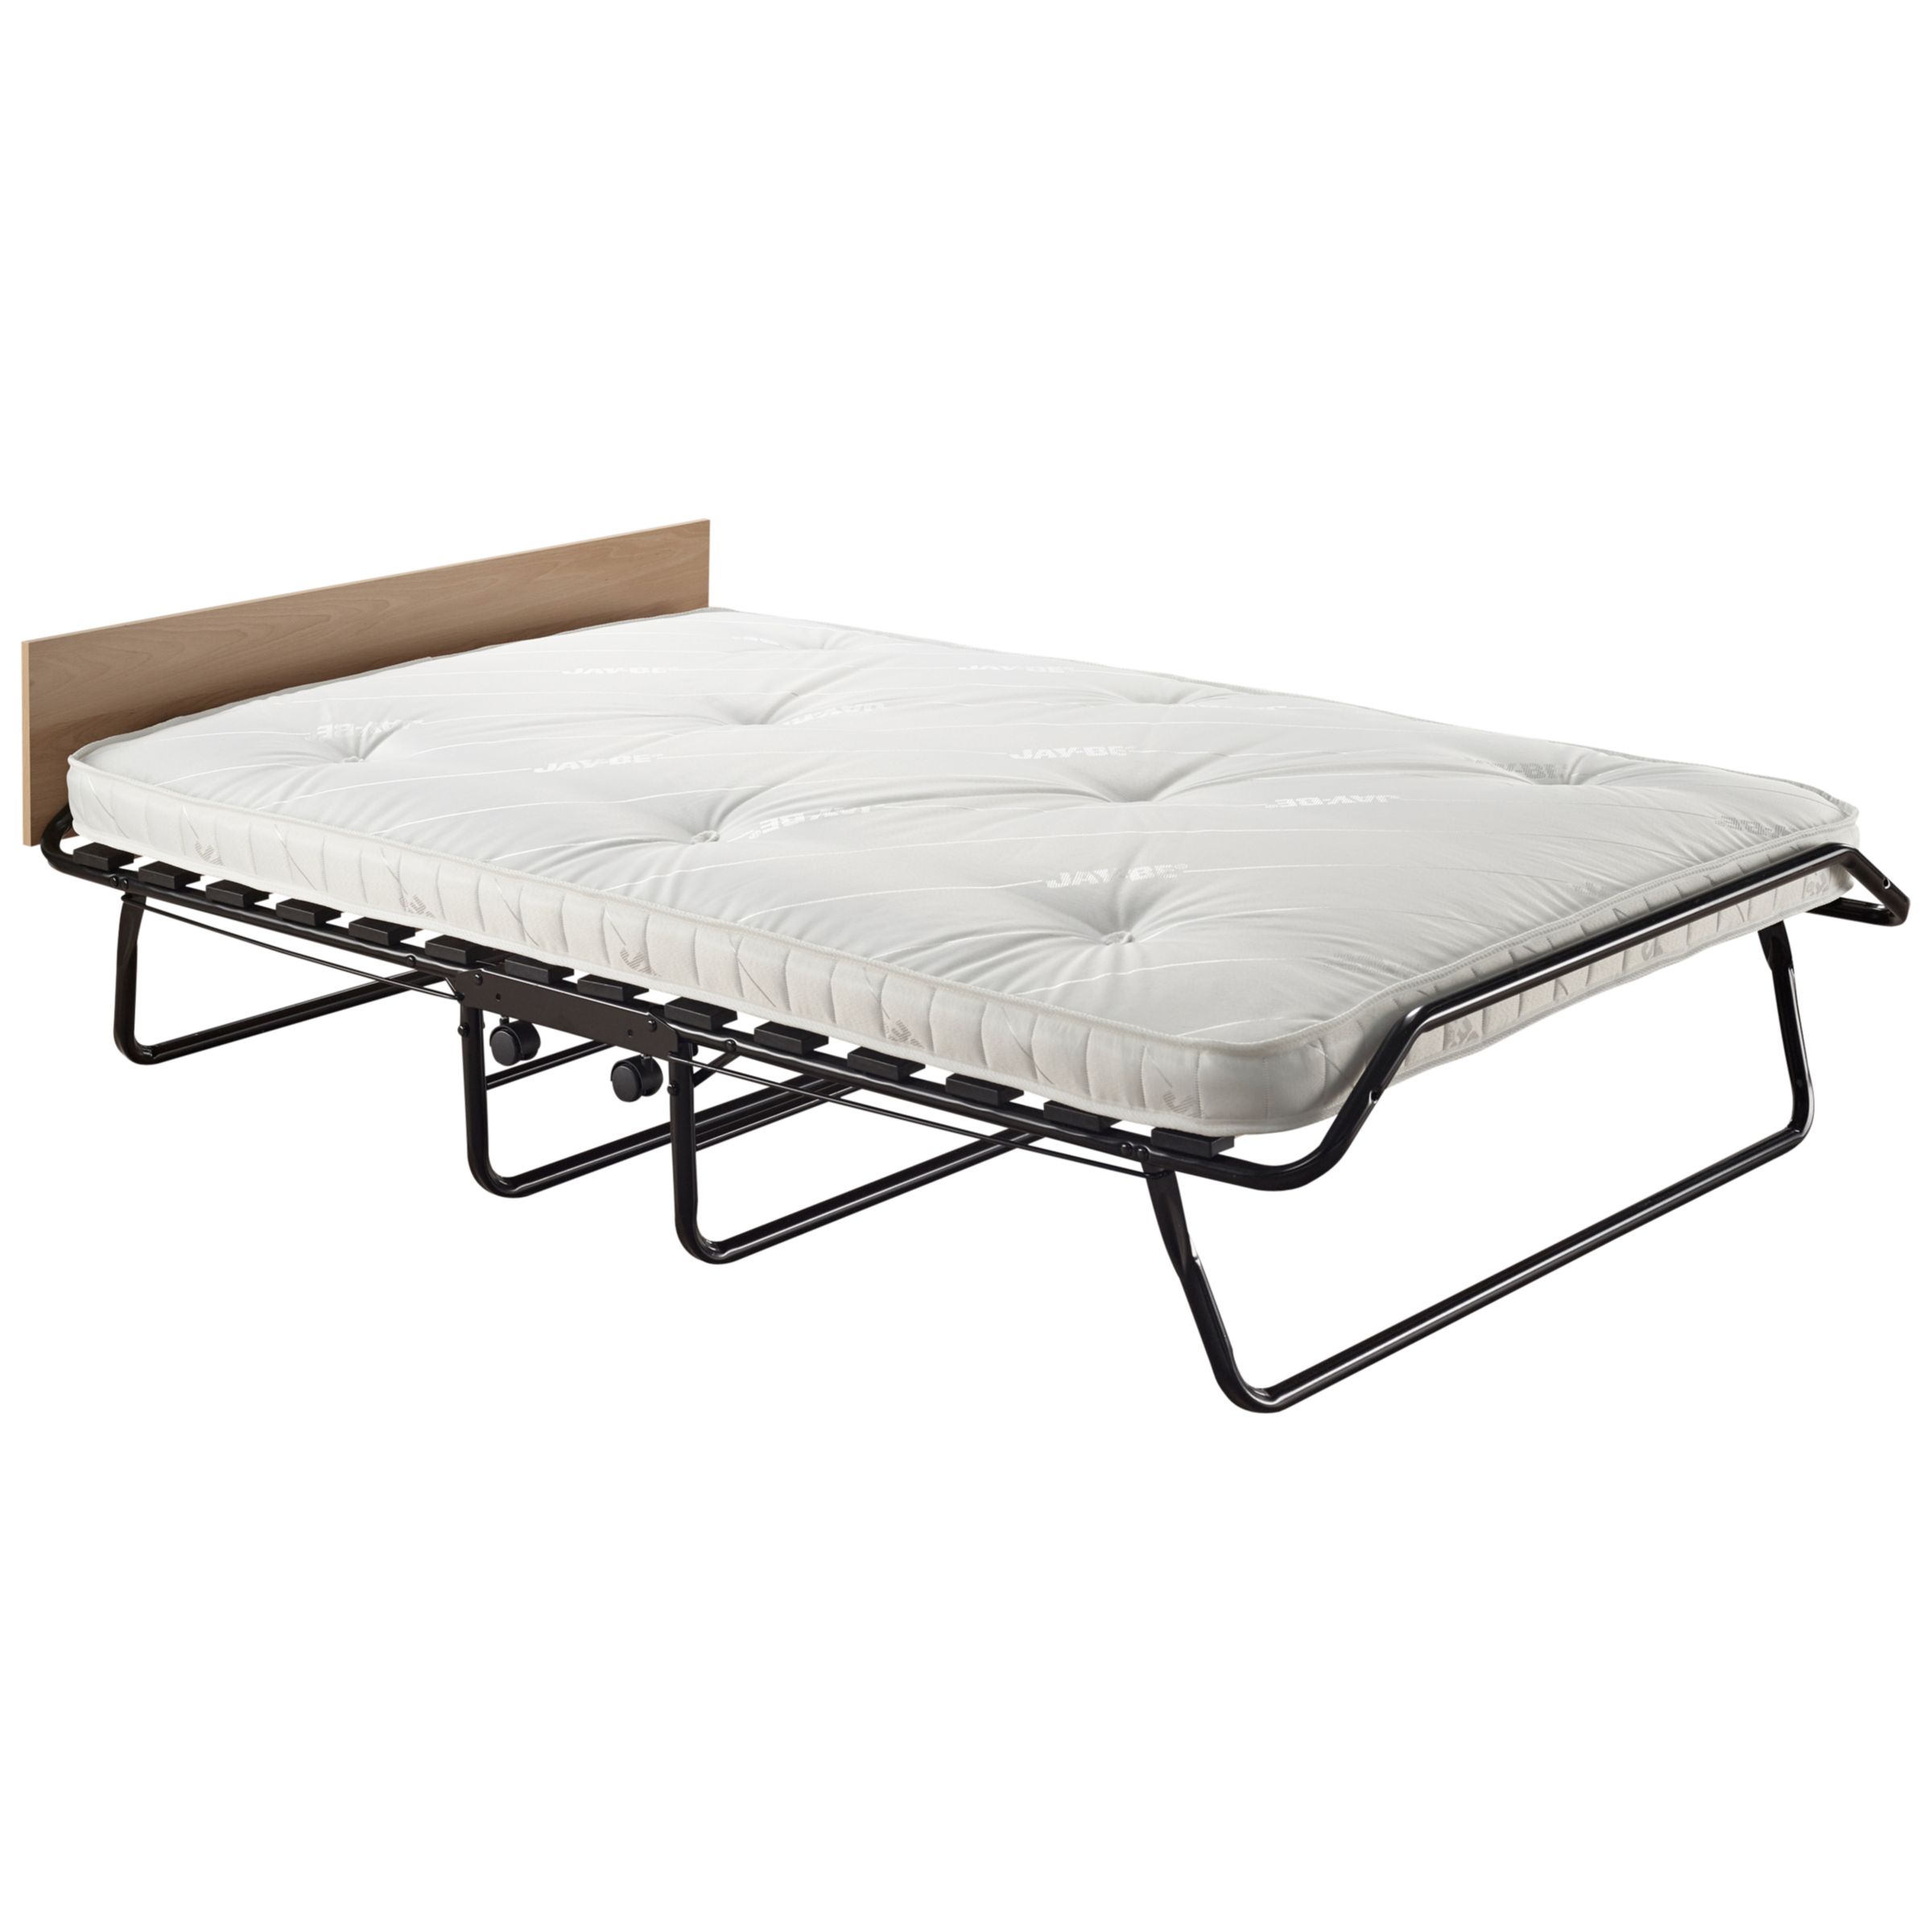 JAY-BE Mayfair Folding Bed with Pocket Sprung Mattress, Small Double